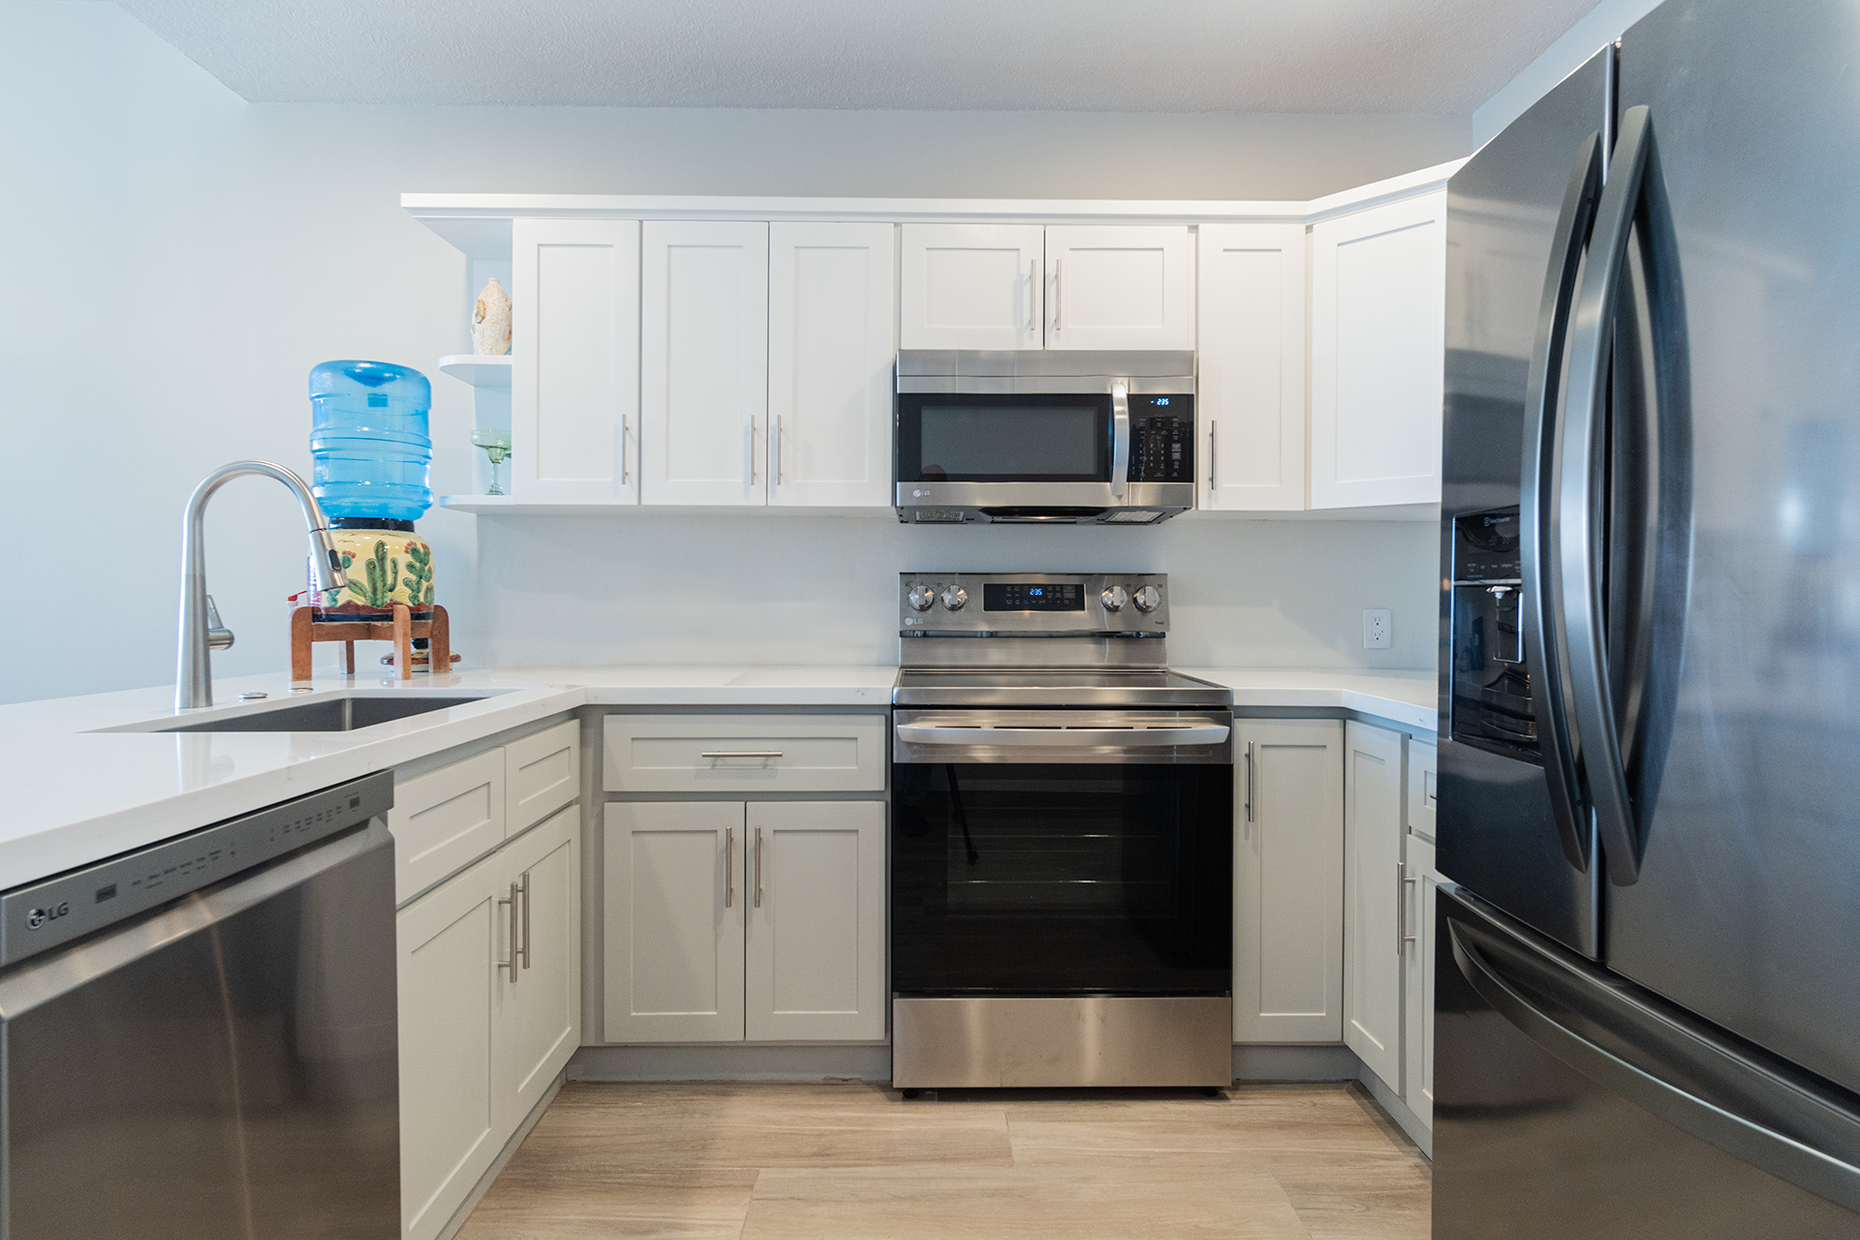 Stainless steel appliances and gleaming white counter tops in the kitchen.